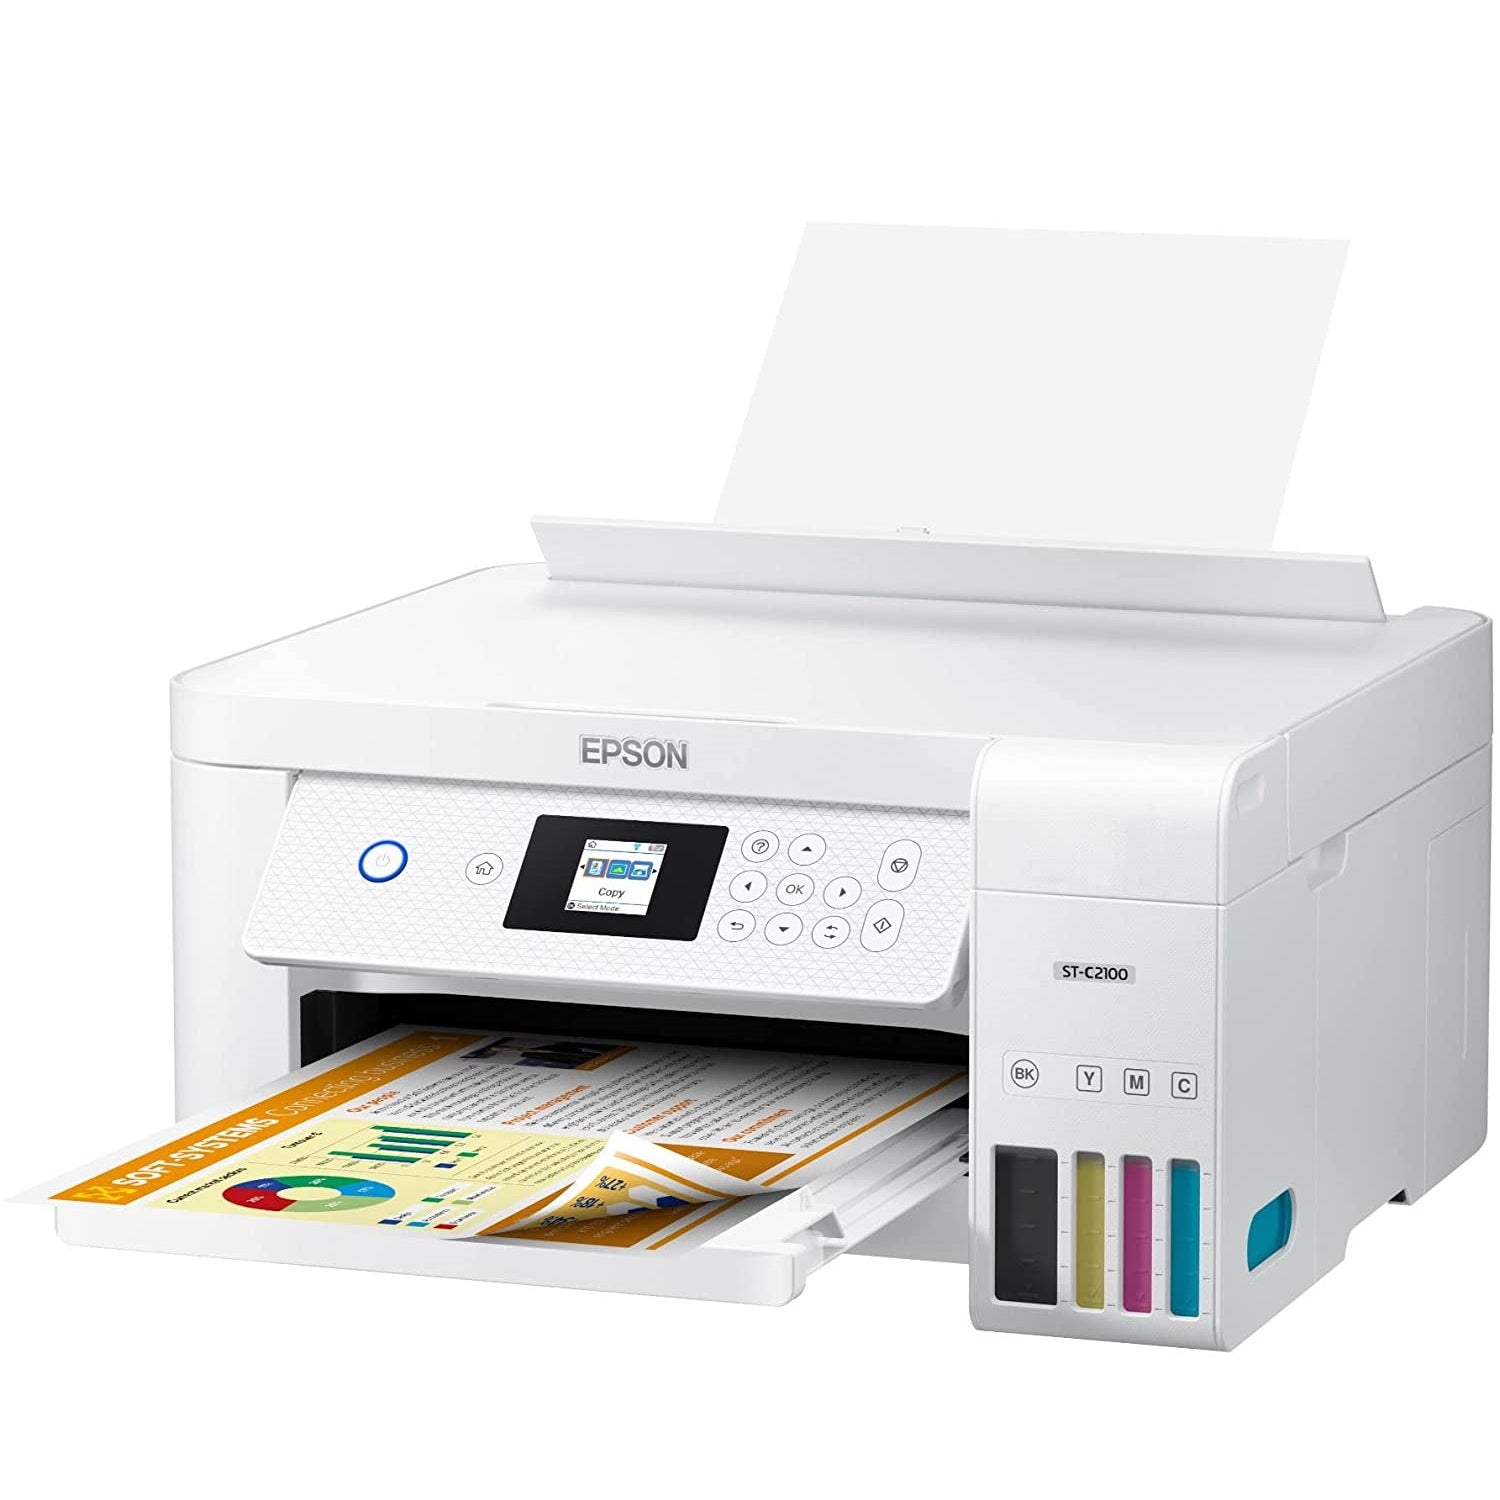 Absolute Toner New Epson WorkForce ST-C2100 Supertank Color Multifunction Printer With Wireless And Auto 2-Sided Printing For Small Offices Showroom Color Copier